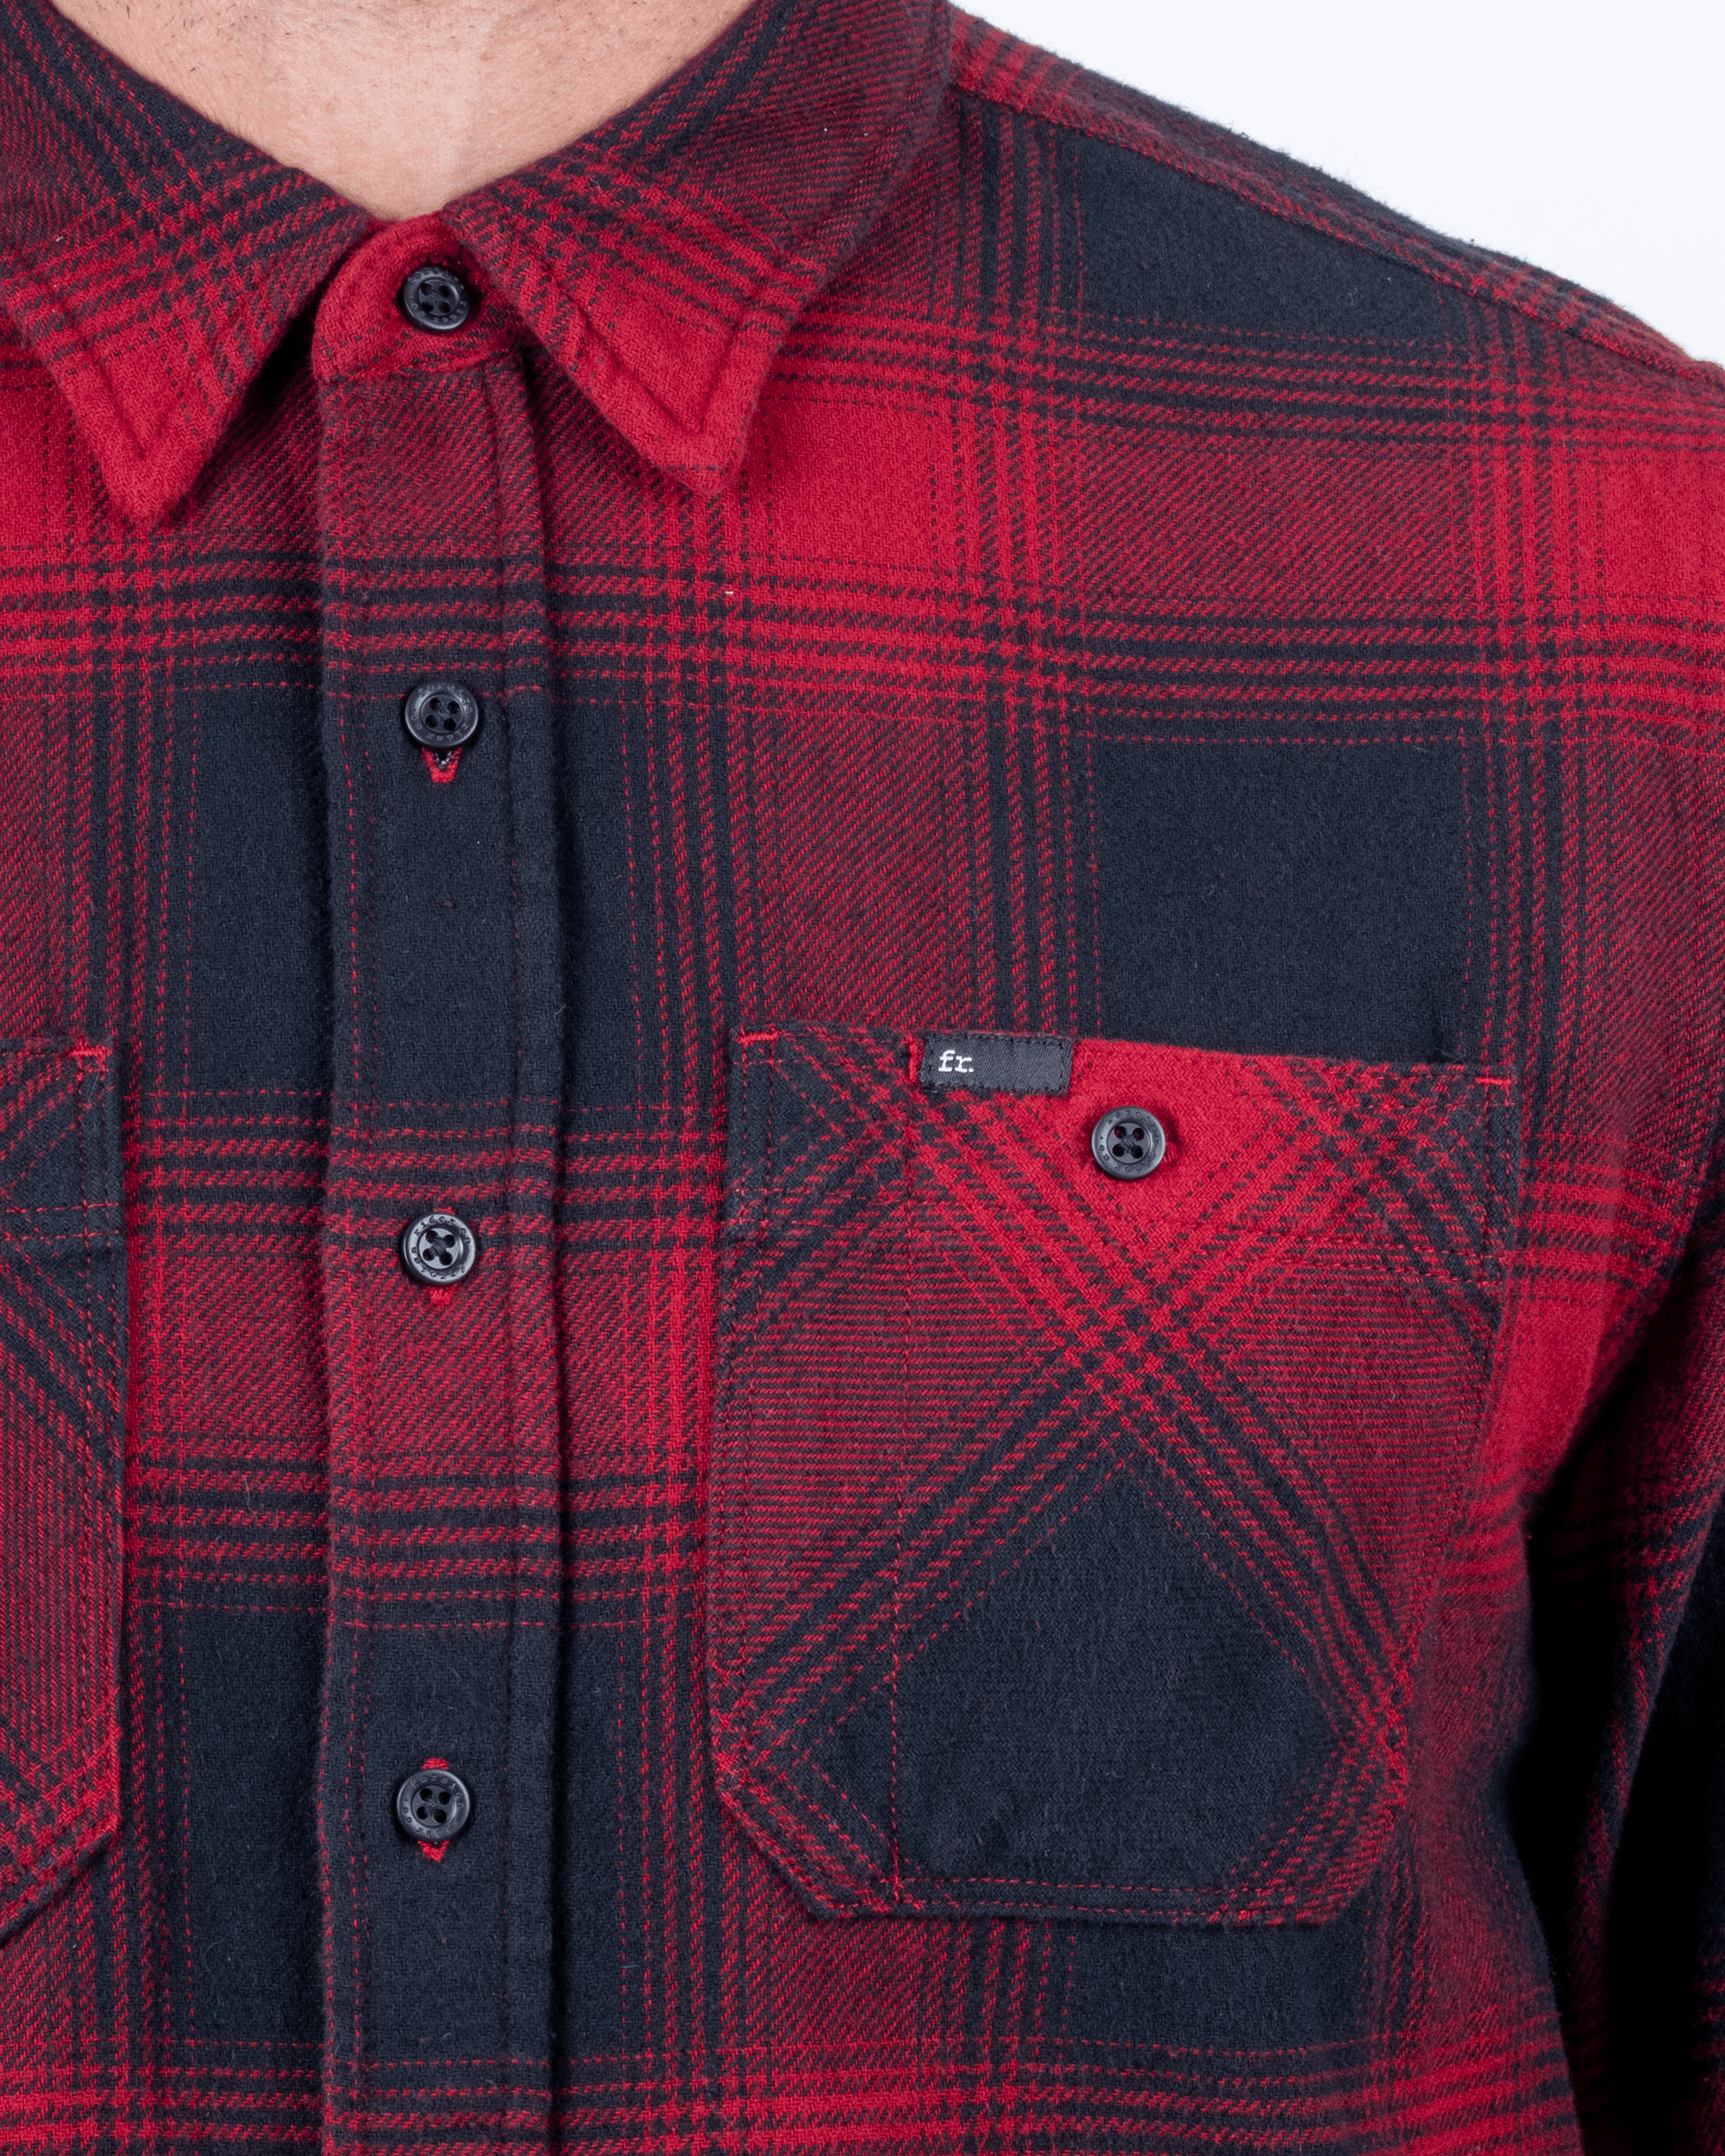 Foreign Rider Co Organic Cotton Red Flannel Plaid Long Sleeve Button Up Shirt Button Chest Pocket